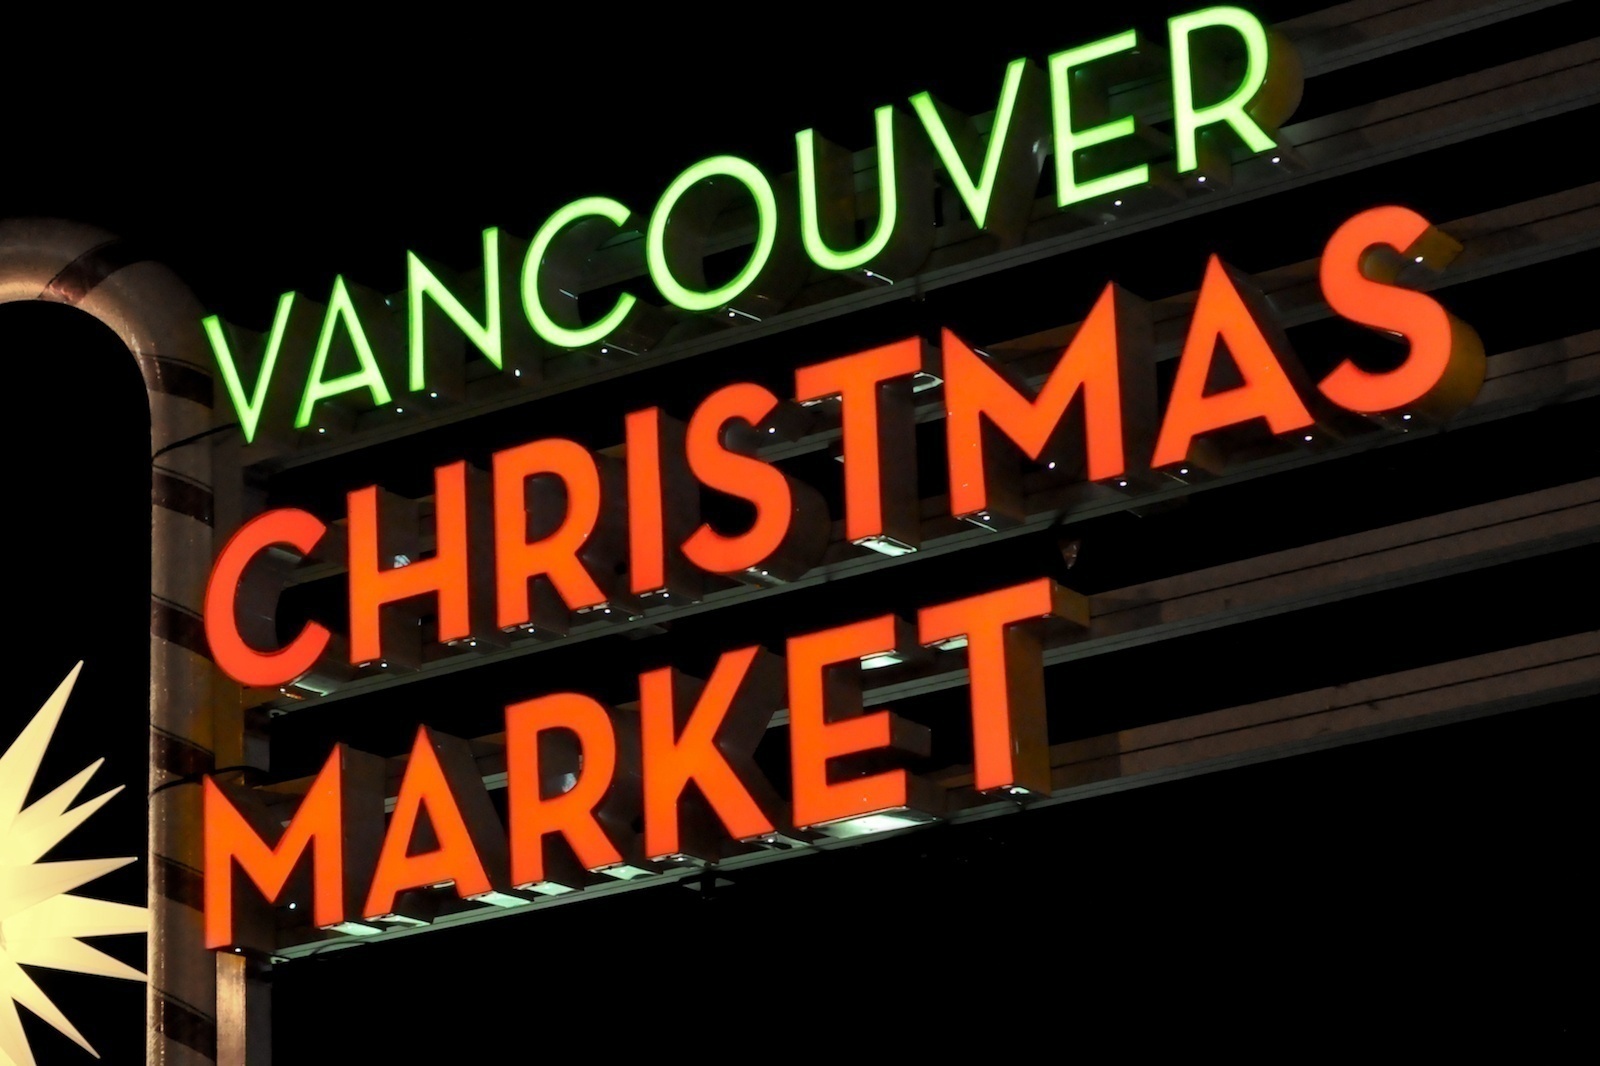 Celebrate New Year's Eve with the family at the Vancouver Christmas Market